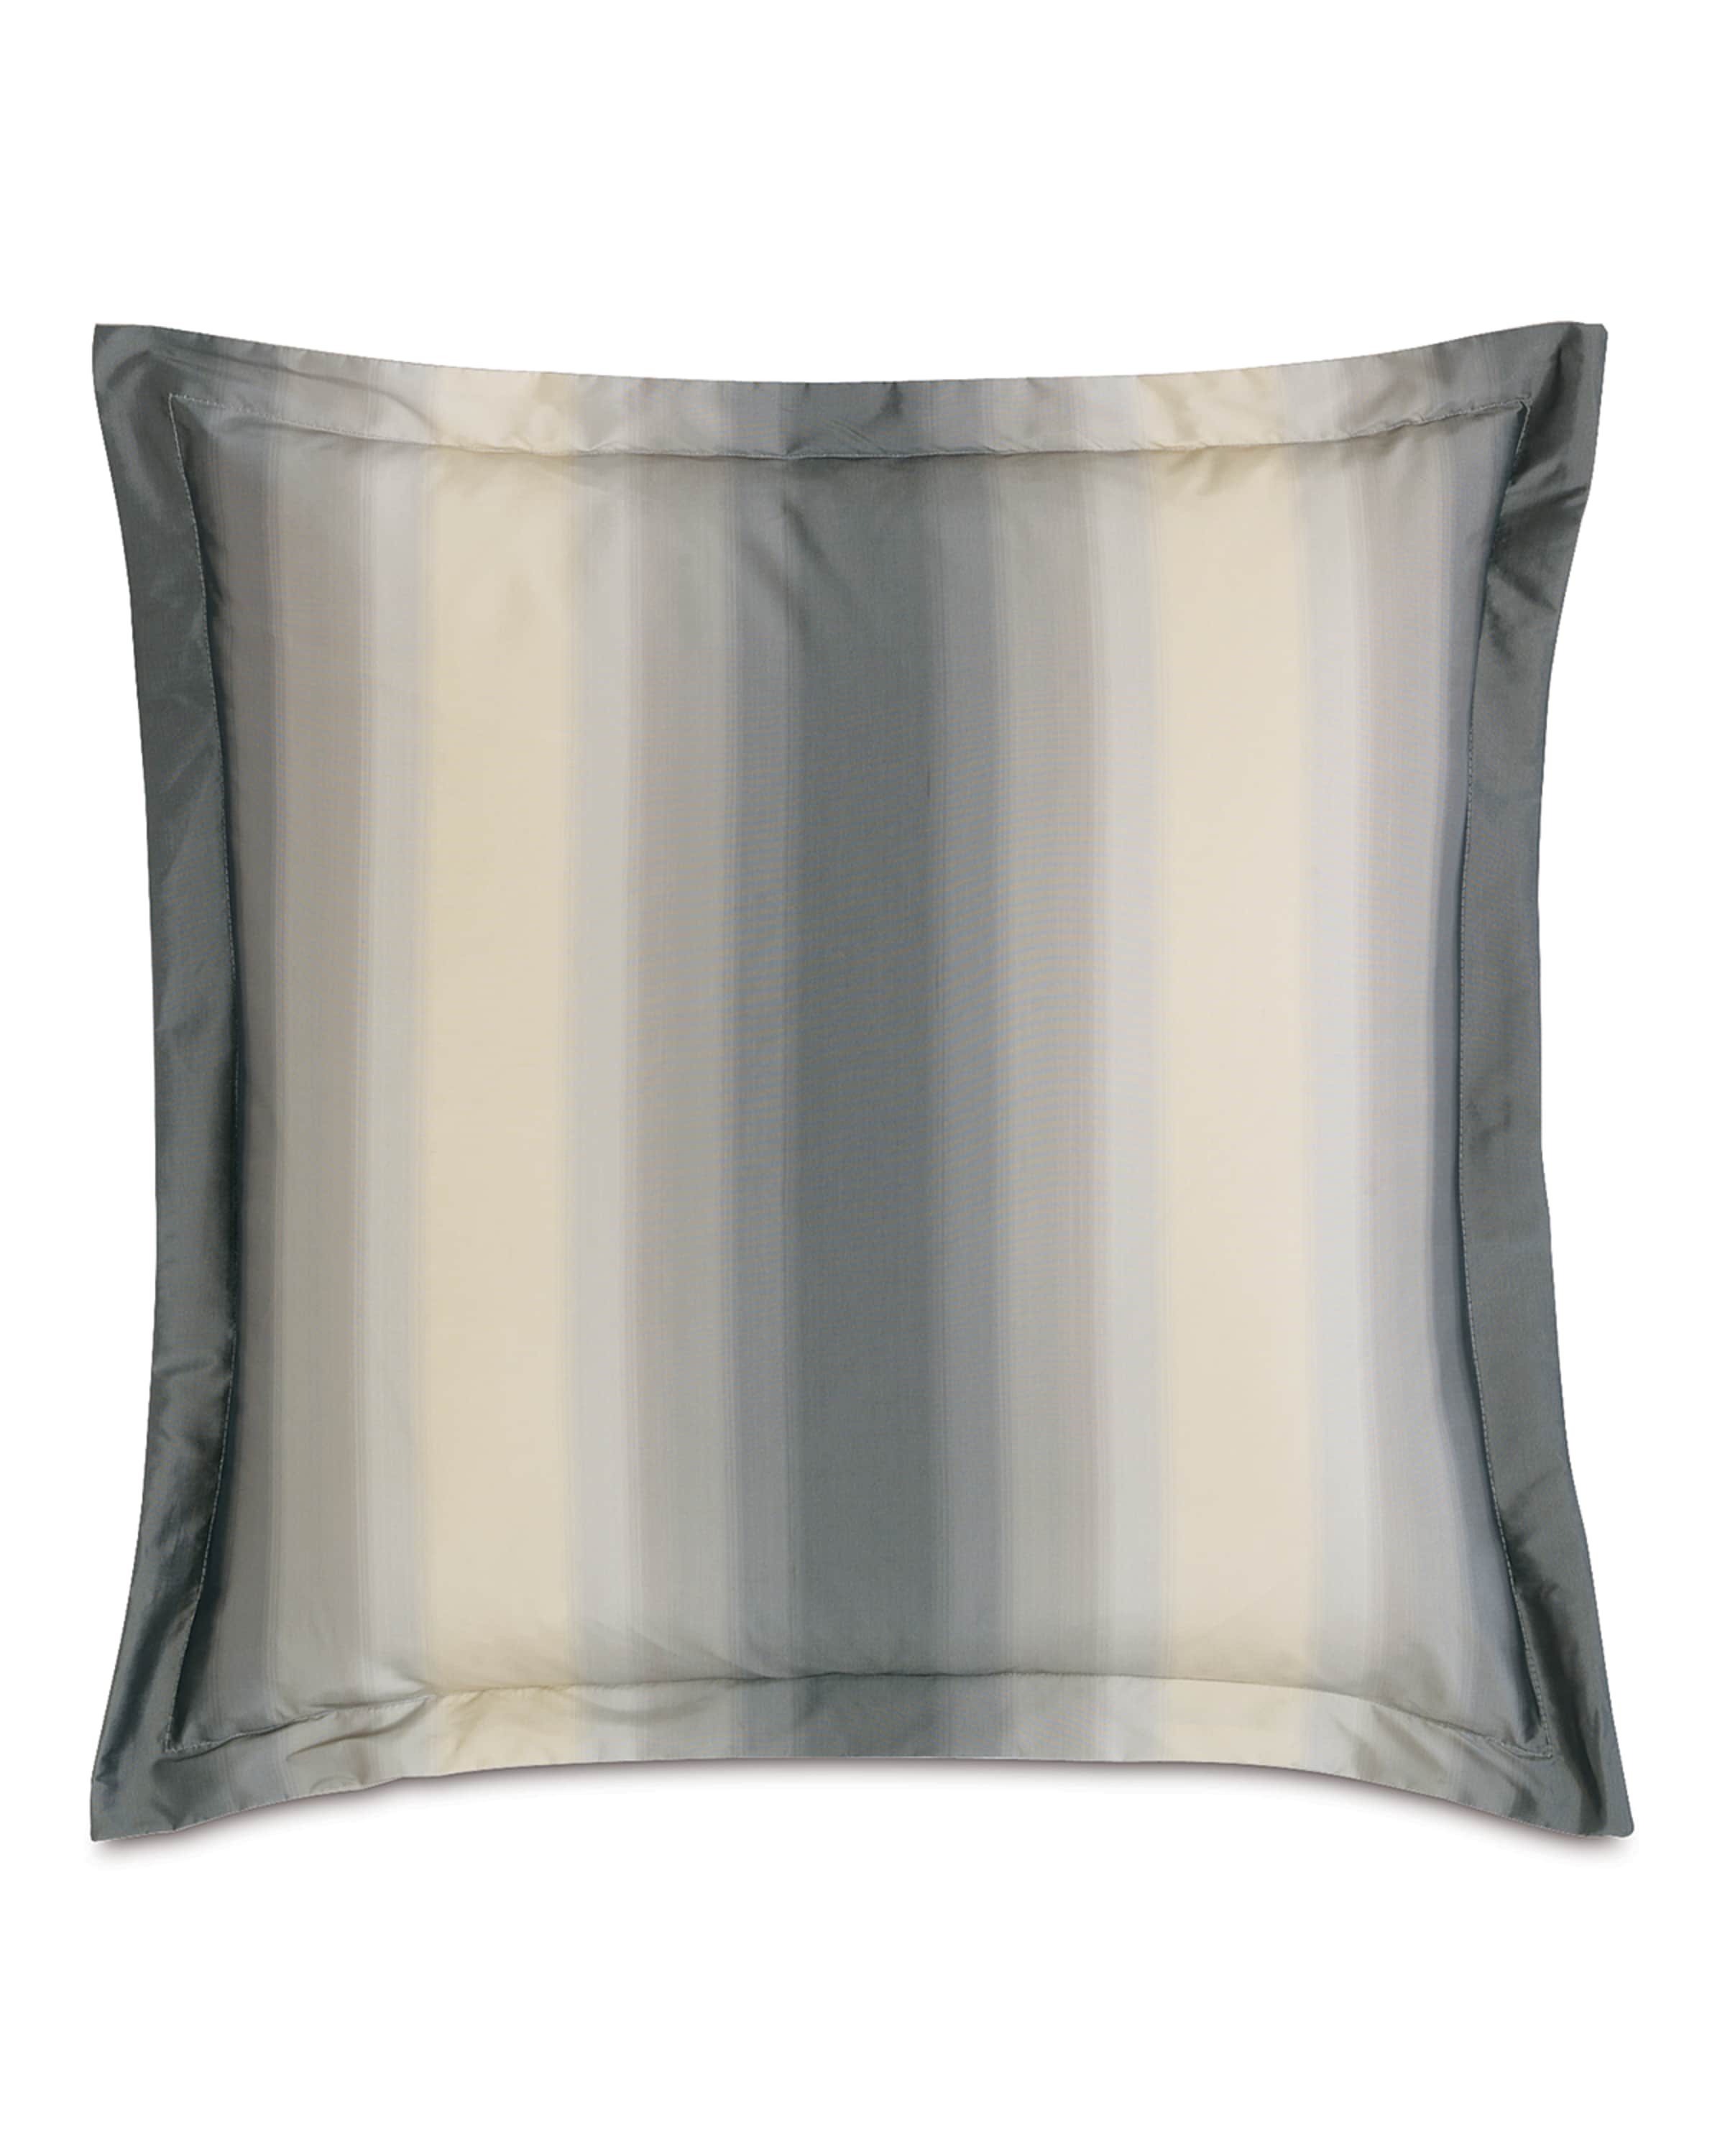 Eastern Accents Soni Slated Euro Stripe Pillow